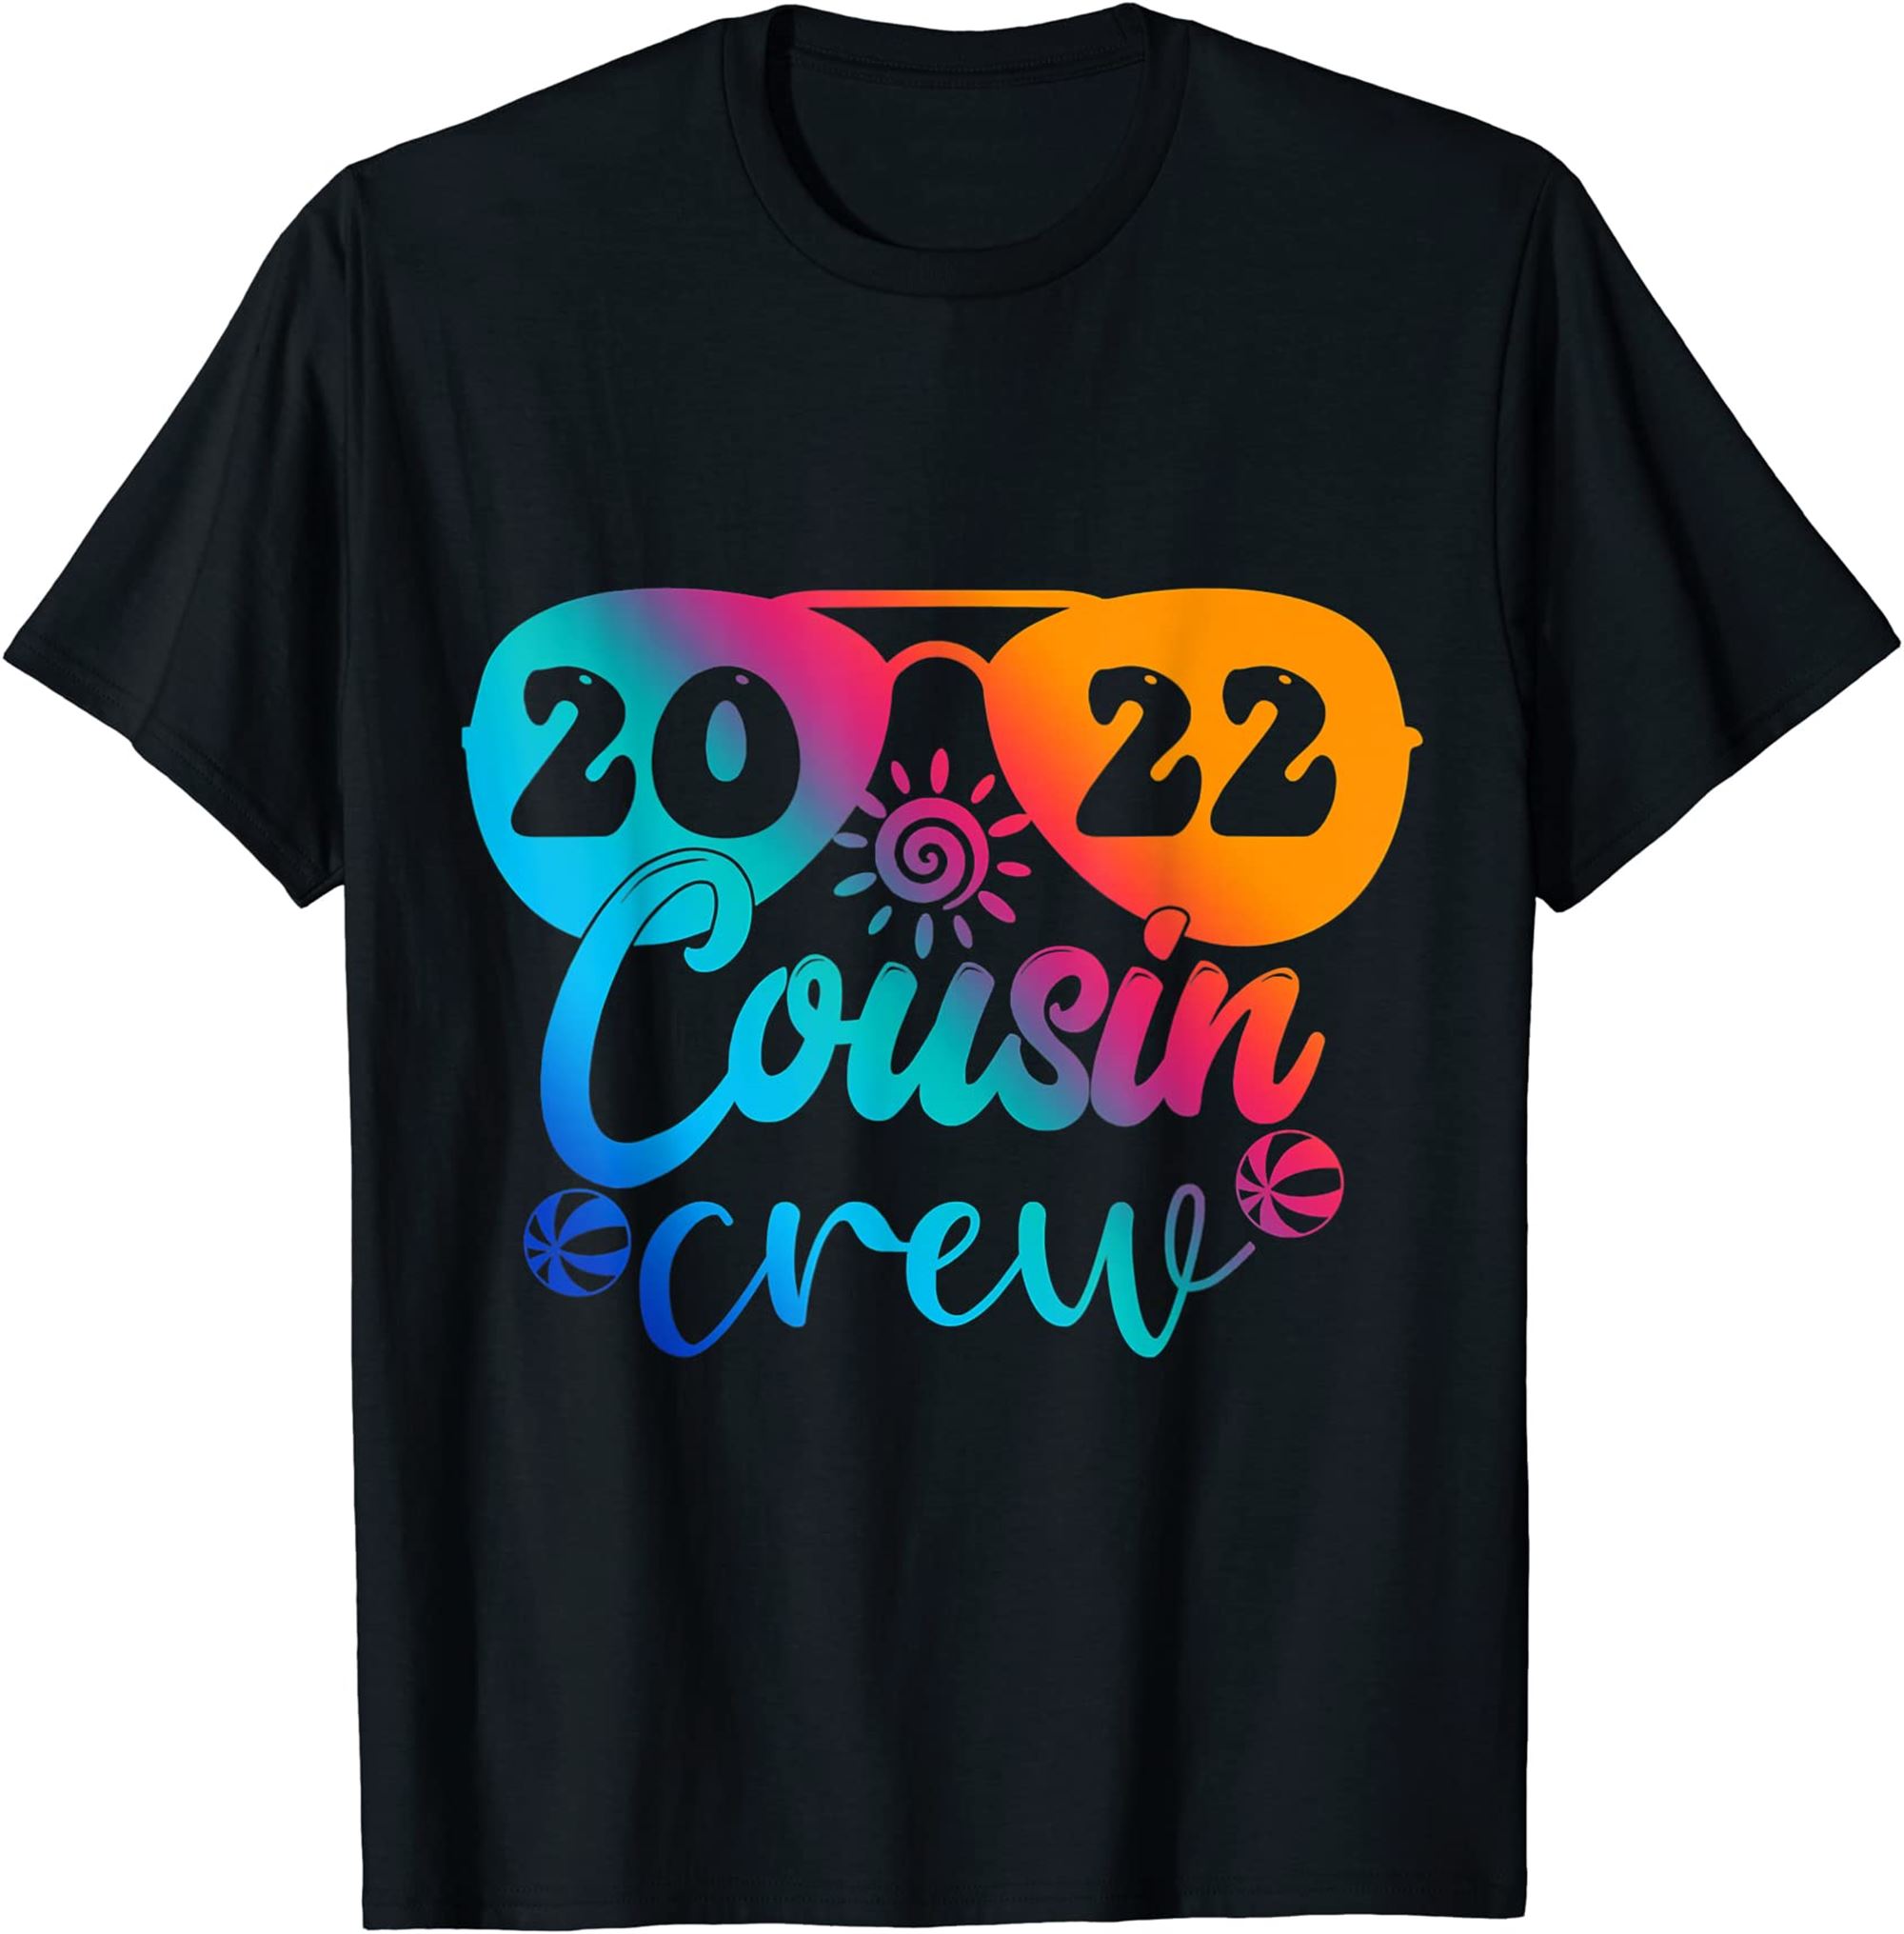 Cousin Crew 2022 Summer Vacation Beach Matching Family Trip T-shirt Size Up To 5xl